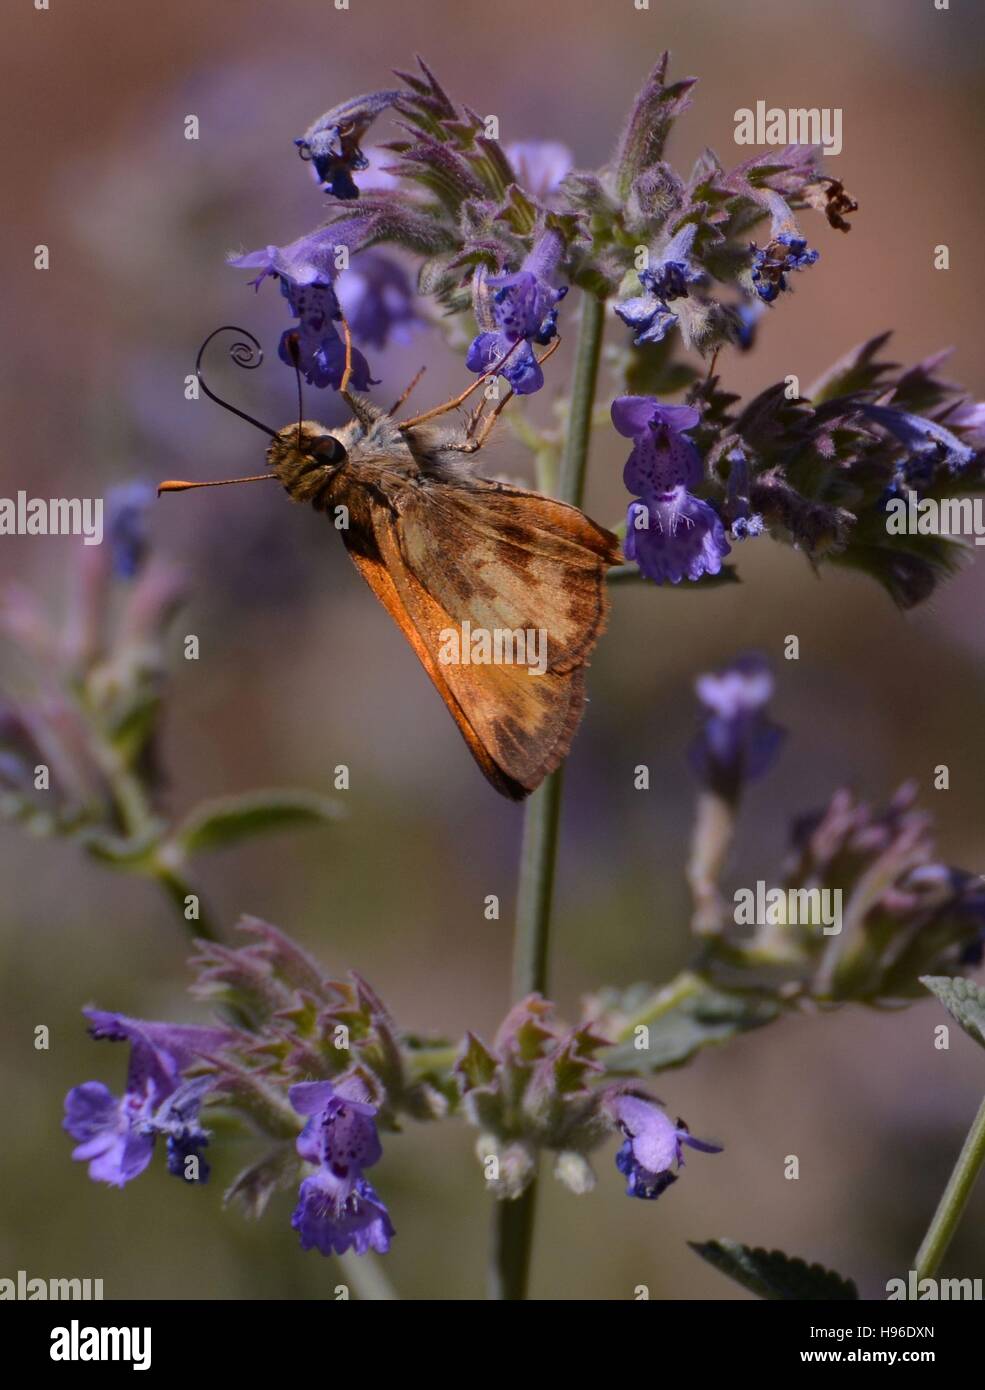 A moth pollinator butterfly feeds on the nectar of a purple flower bloom at the Two Ponds National Wildlife Refuge July 14, 2016 in Arvada, Colorado. Stock Photo